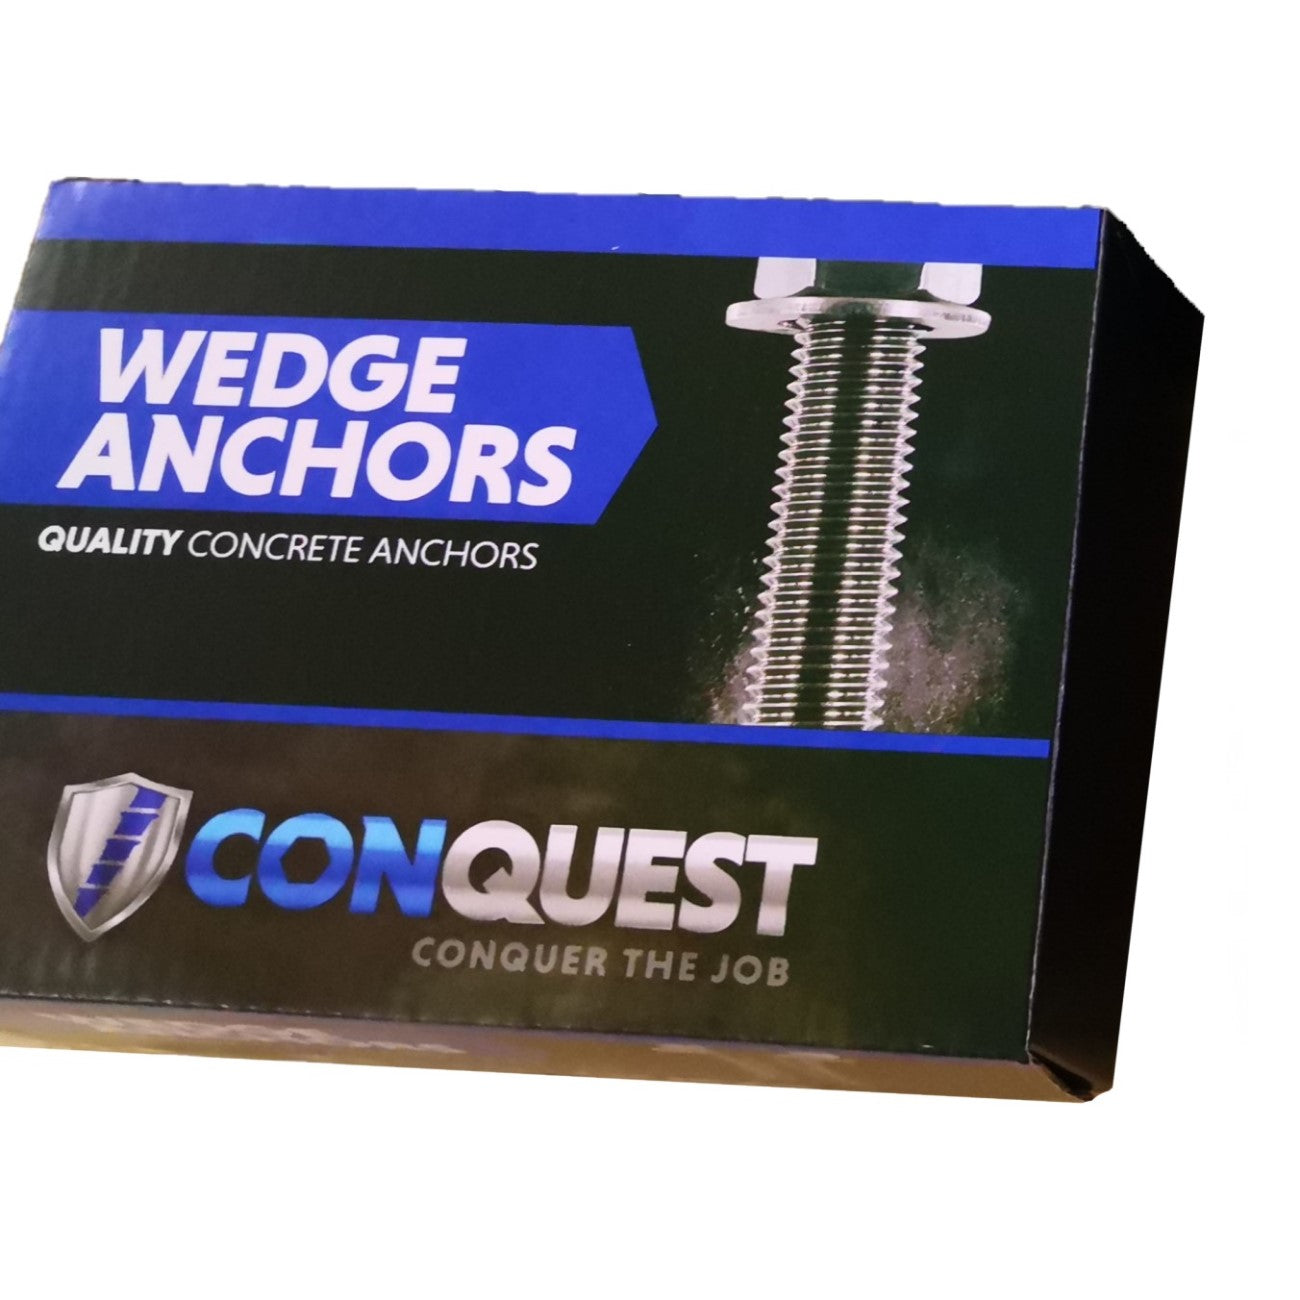 5/8" x 4-1/2" Conquest Wedge Anchors - 316 Stainless Steel, Pkg 25